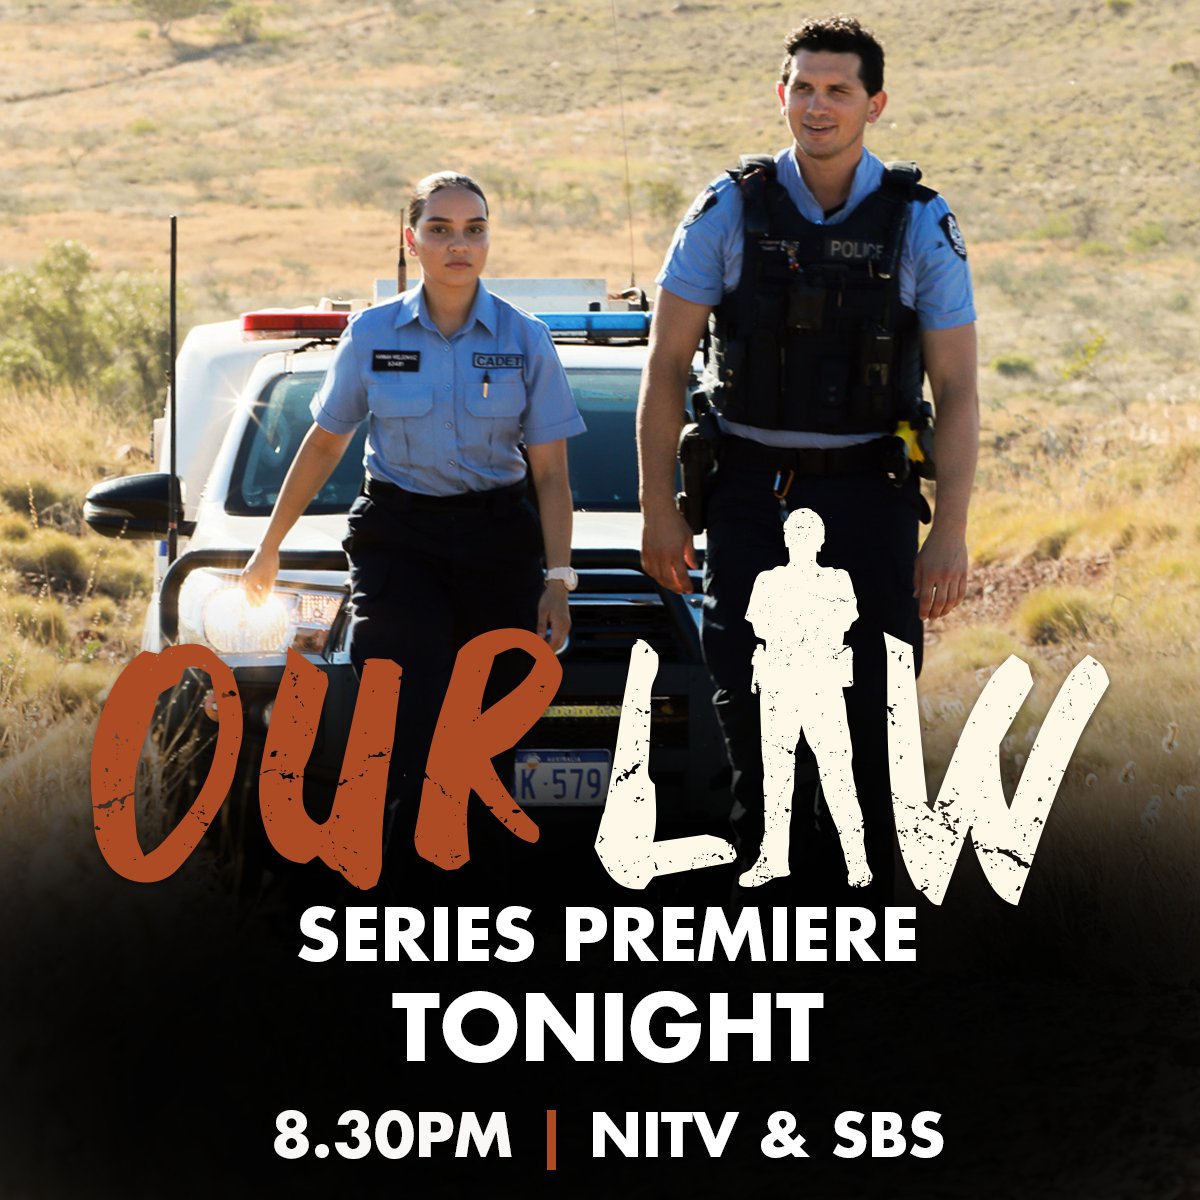 TONIGHT ON @NITV and @SBS OUR LAW SERIES - EPISODE 1 Directed by #PerunBonser + Produced by myself #TaryneLAFFAR (PiNK PEPPER) + #SamBodhiField (Periscope Pictures). Thanks to @Screenwest @ScreenAustralia @NITV + #WAPolice for your support. Big thanks to our EPs @blackfellafilms